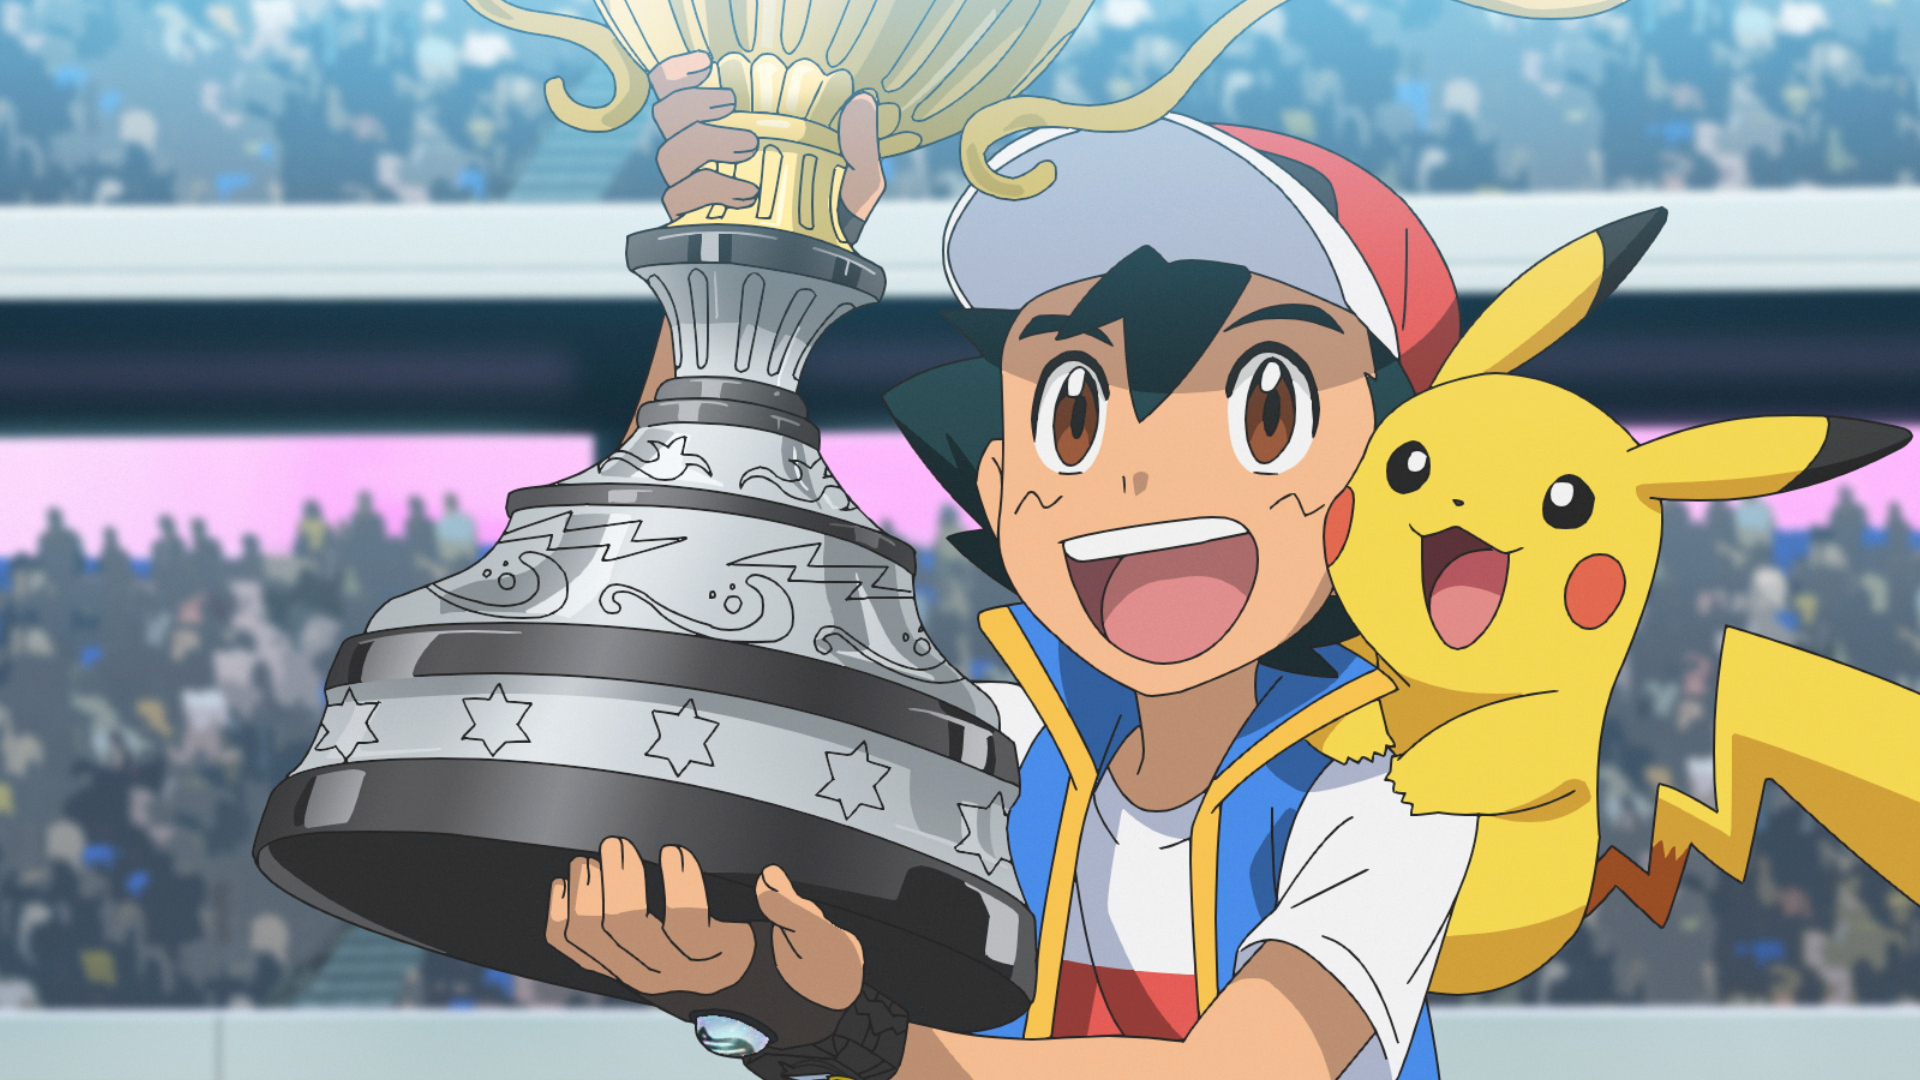 An image of Ash holding up a giant trophy in the Pokémon anime. Pikachu is sitting on his shoulder and they’re both smiling.